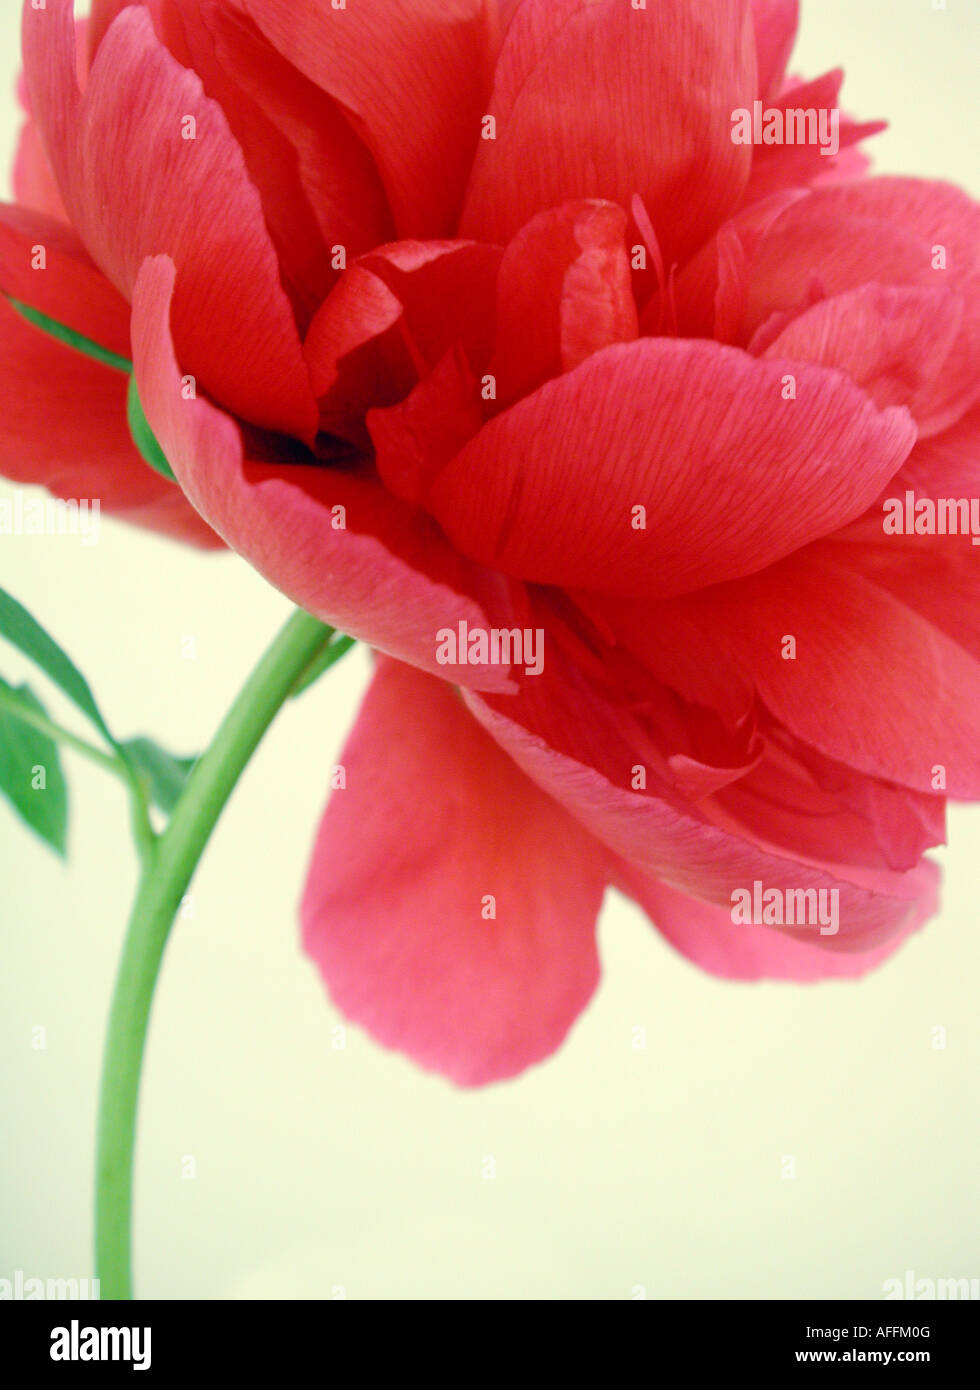 One red Peony flower against a cream background. Stock Photo